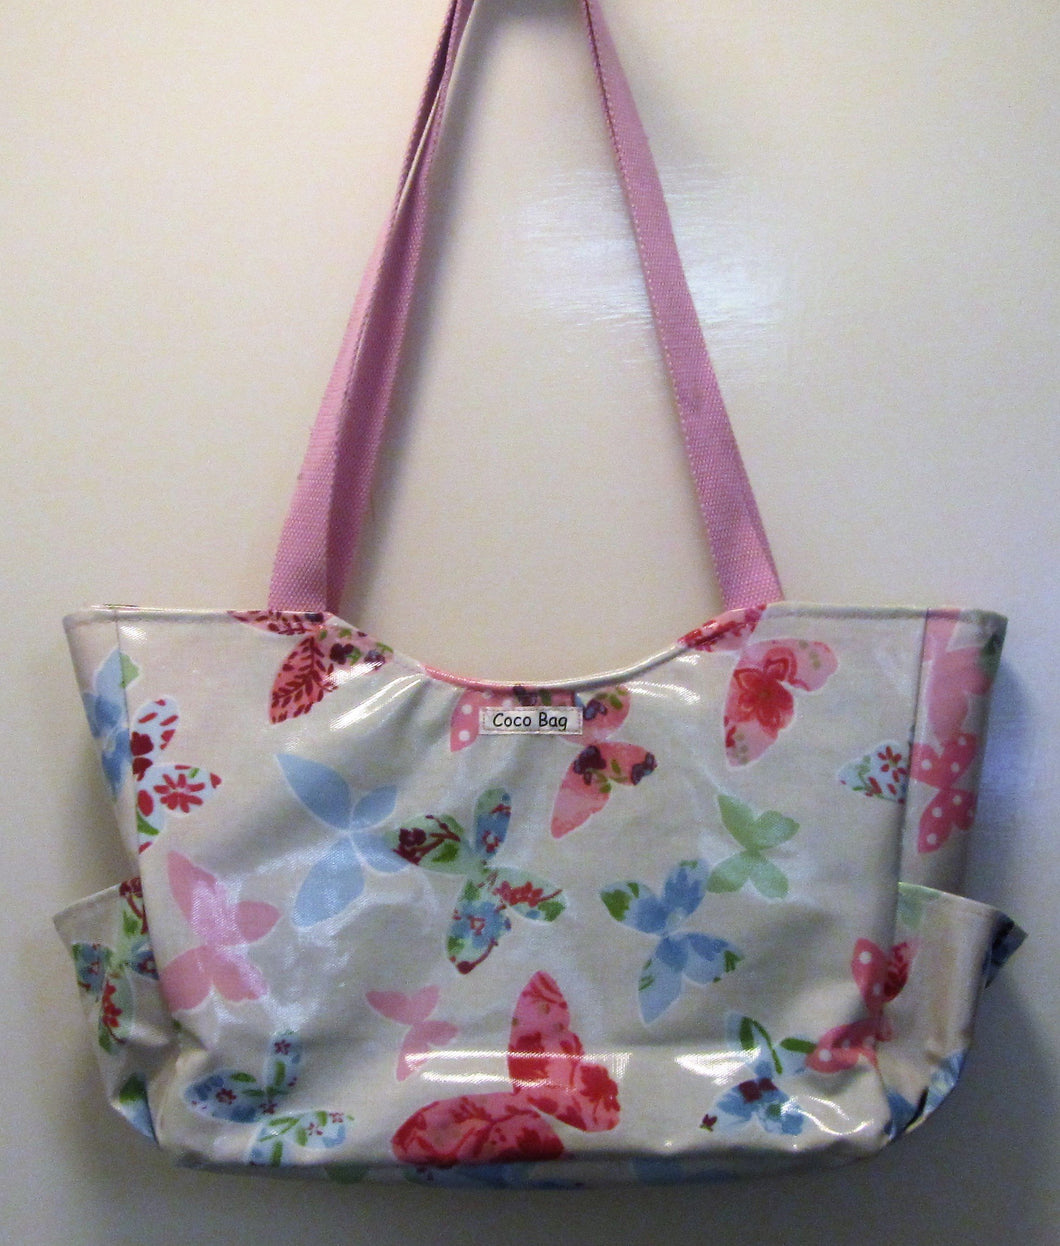 Beautiful handcrafted butterflies wax fabric handbag with two pink handles